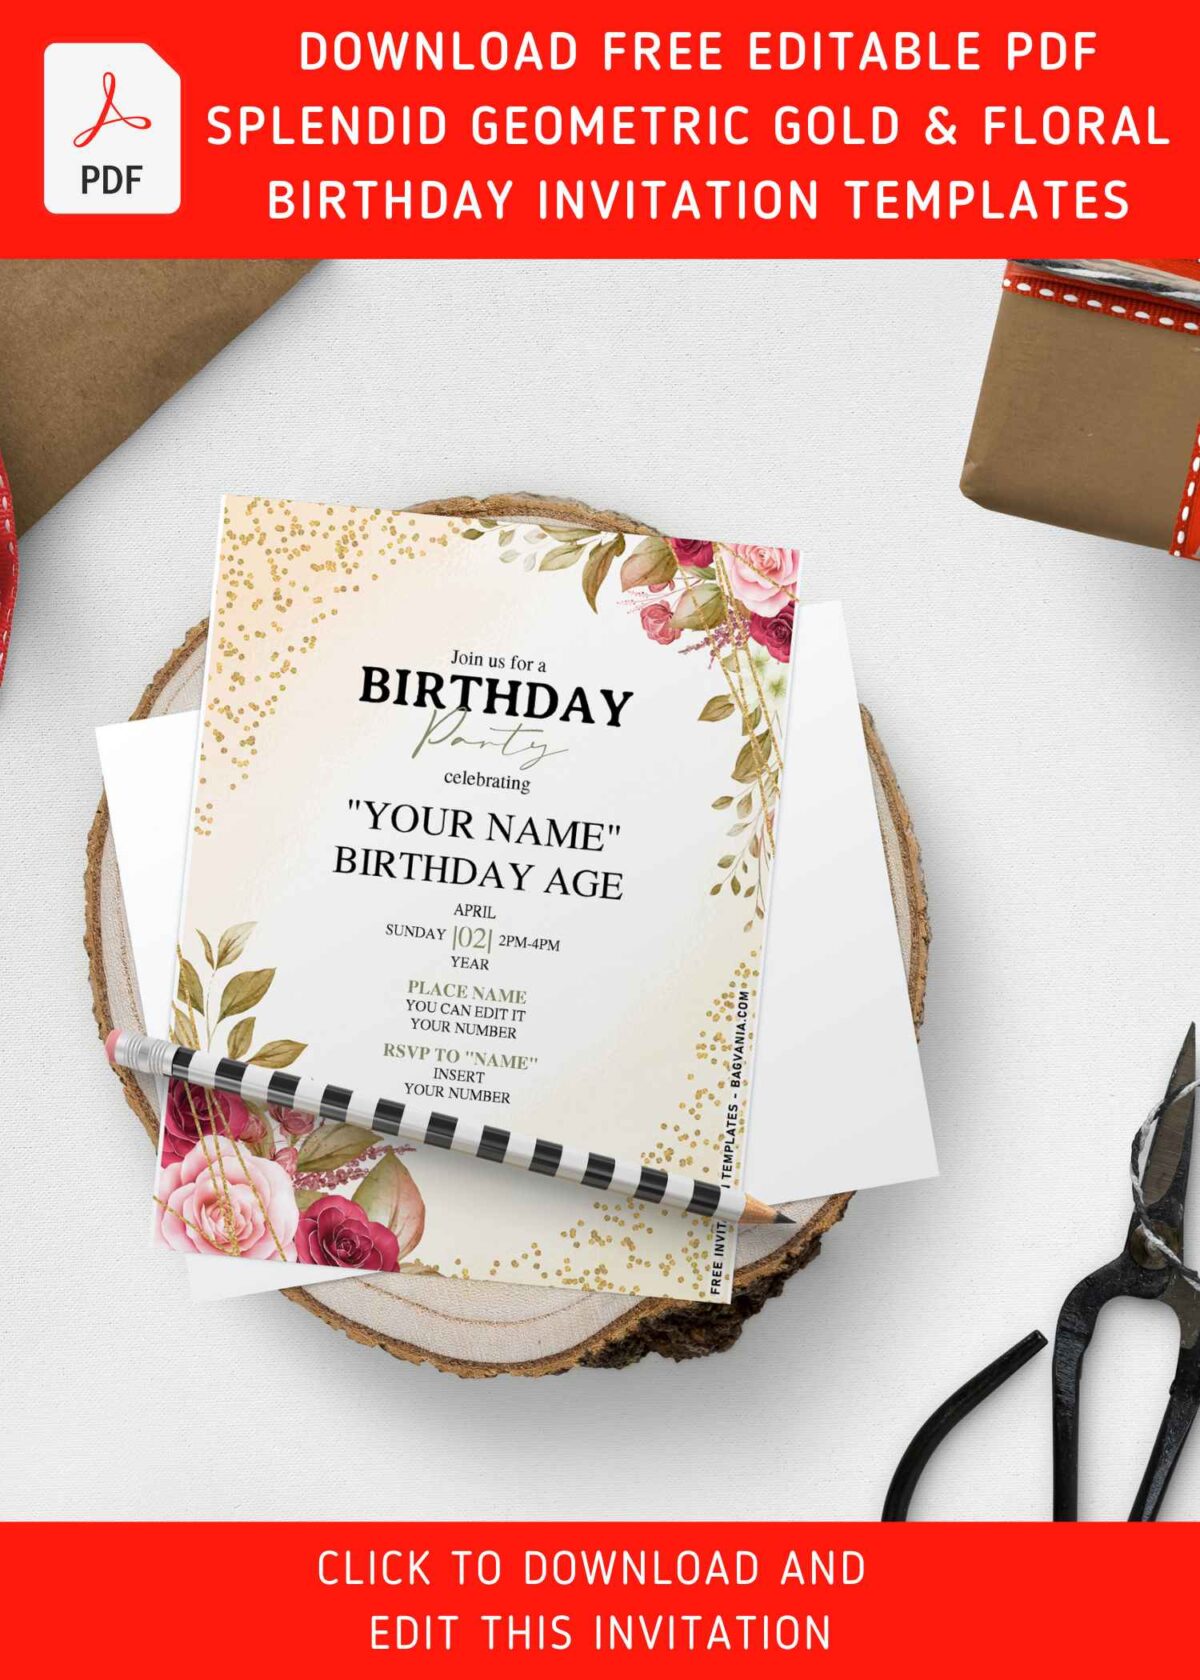 (Free Editable PDF) Champagne Gold Glitter Floral Birthday Invitation Templates with watercolor rose